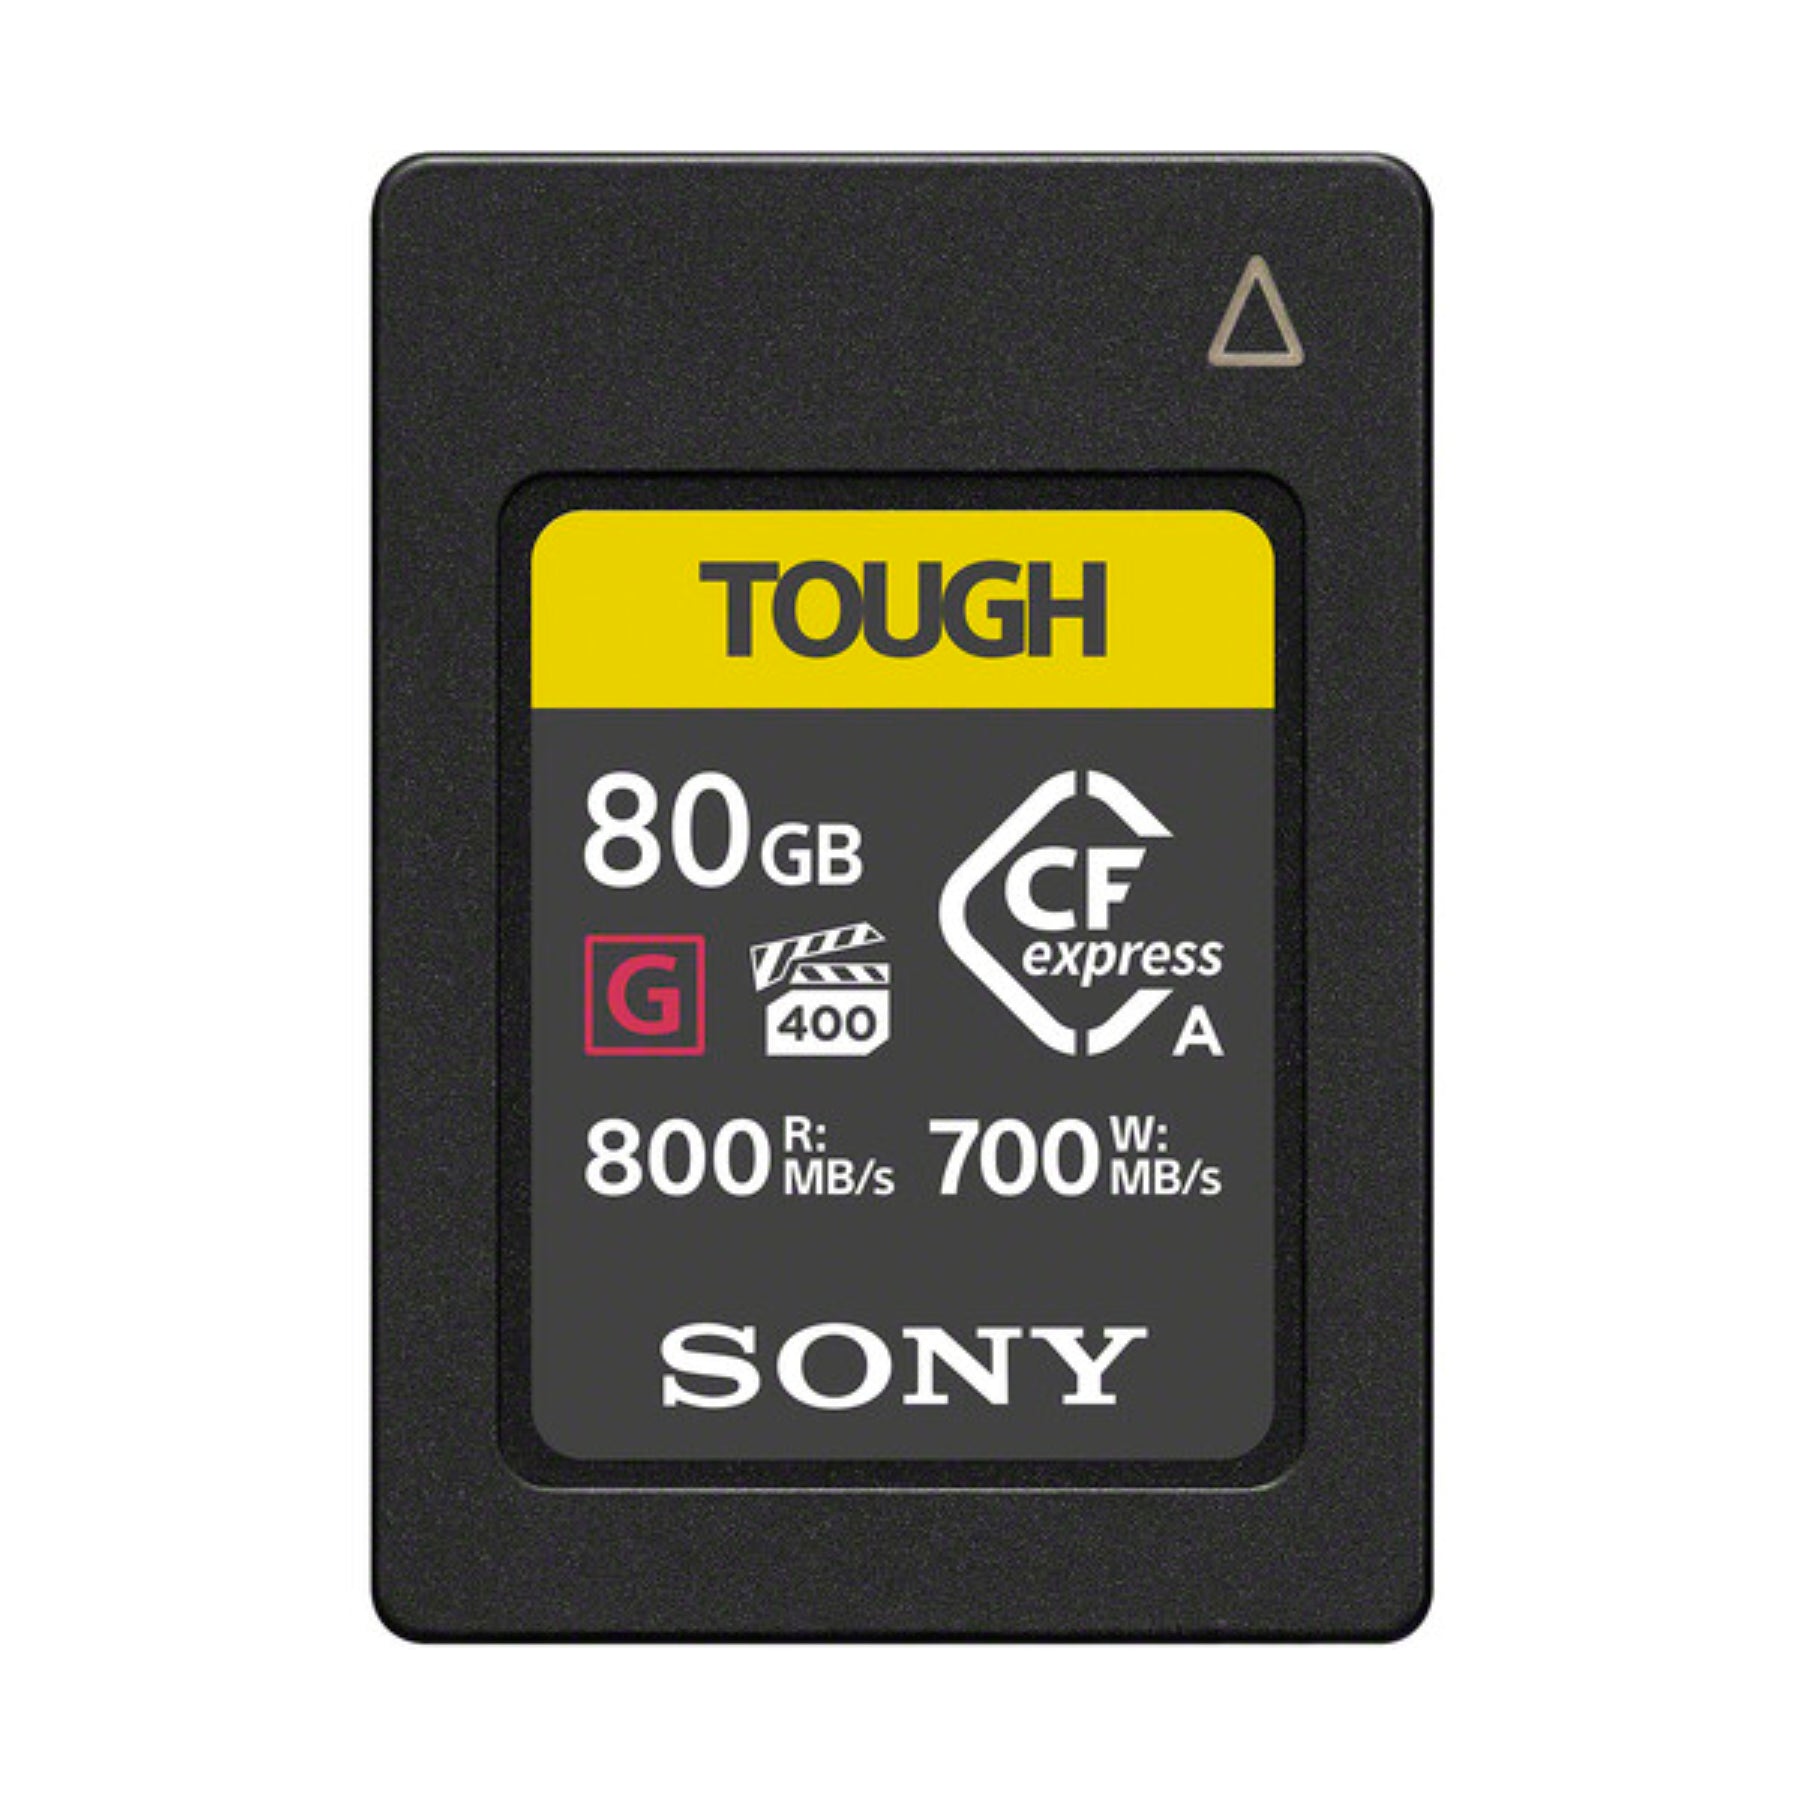 Buy Sony CFexpress Type A TOUGH Memory Card 80gb | Topic Store